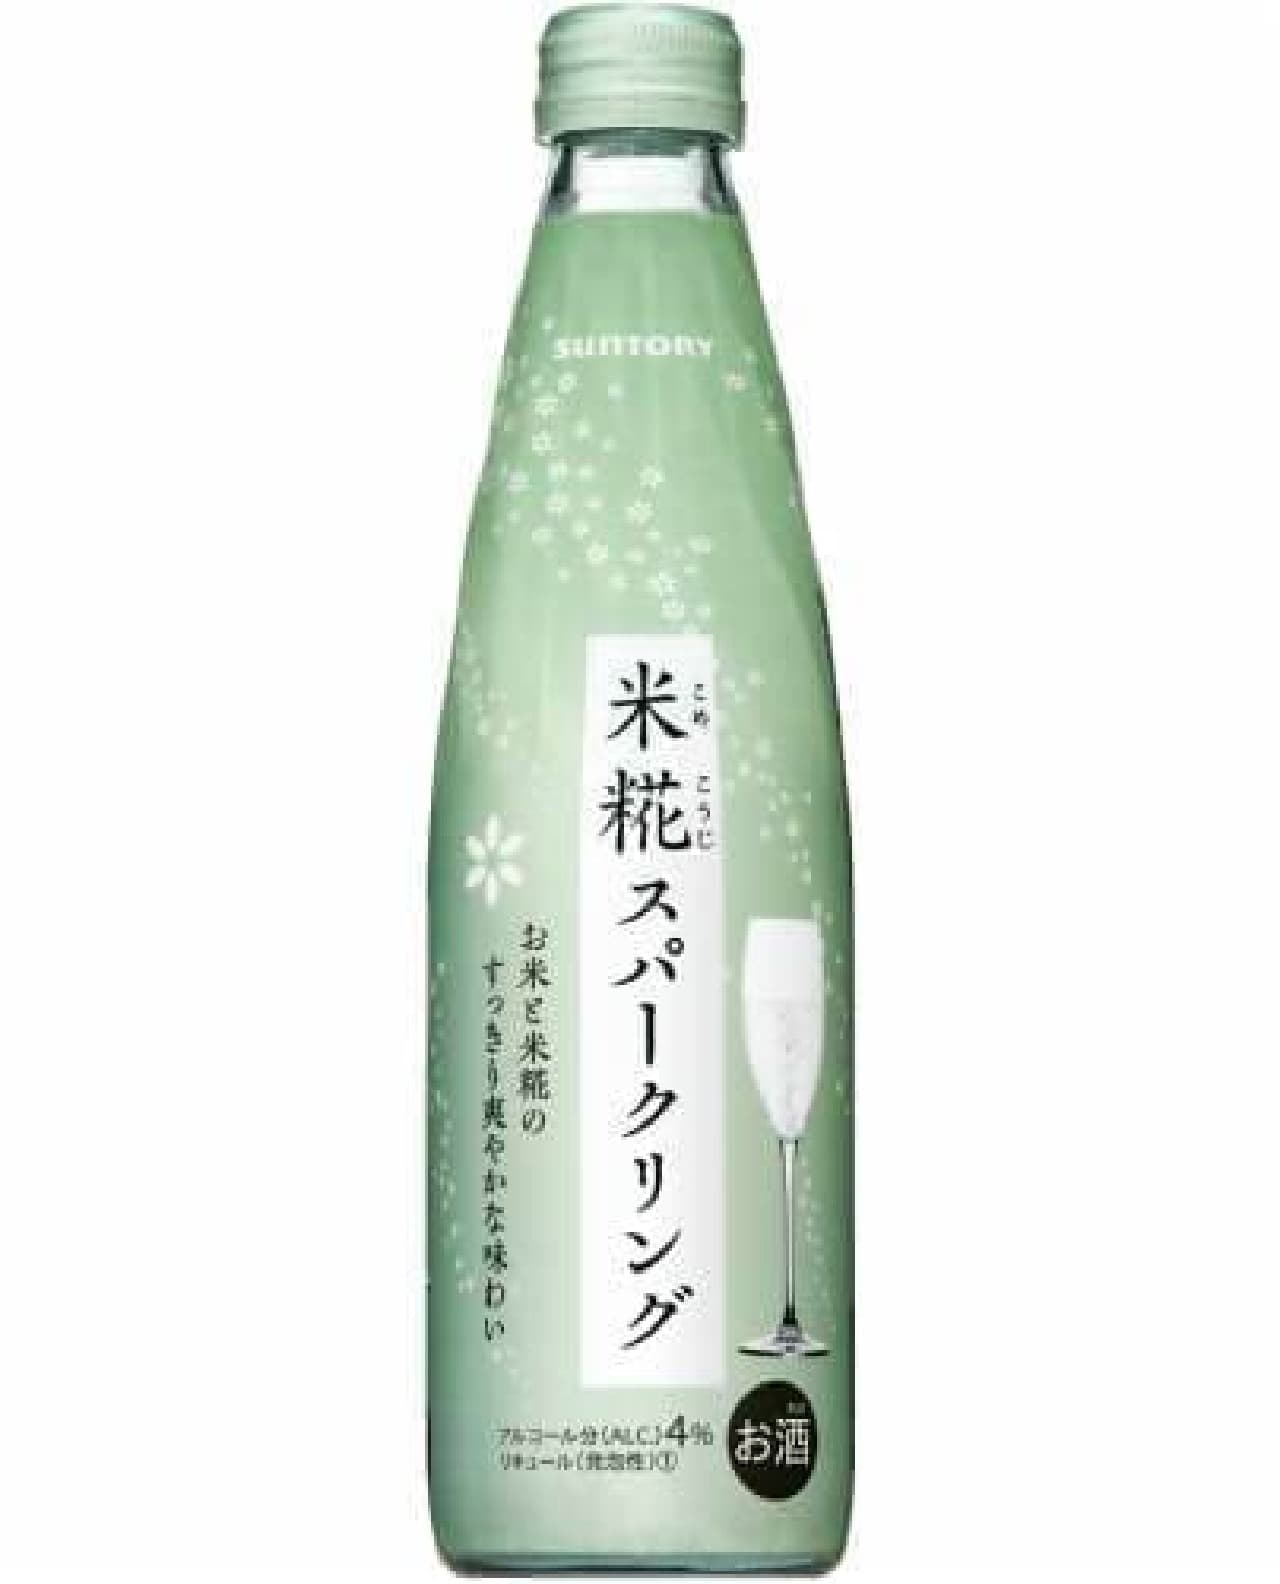 How about "Japanese sparkling"?